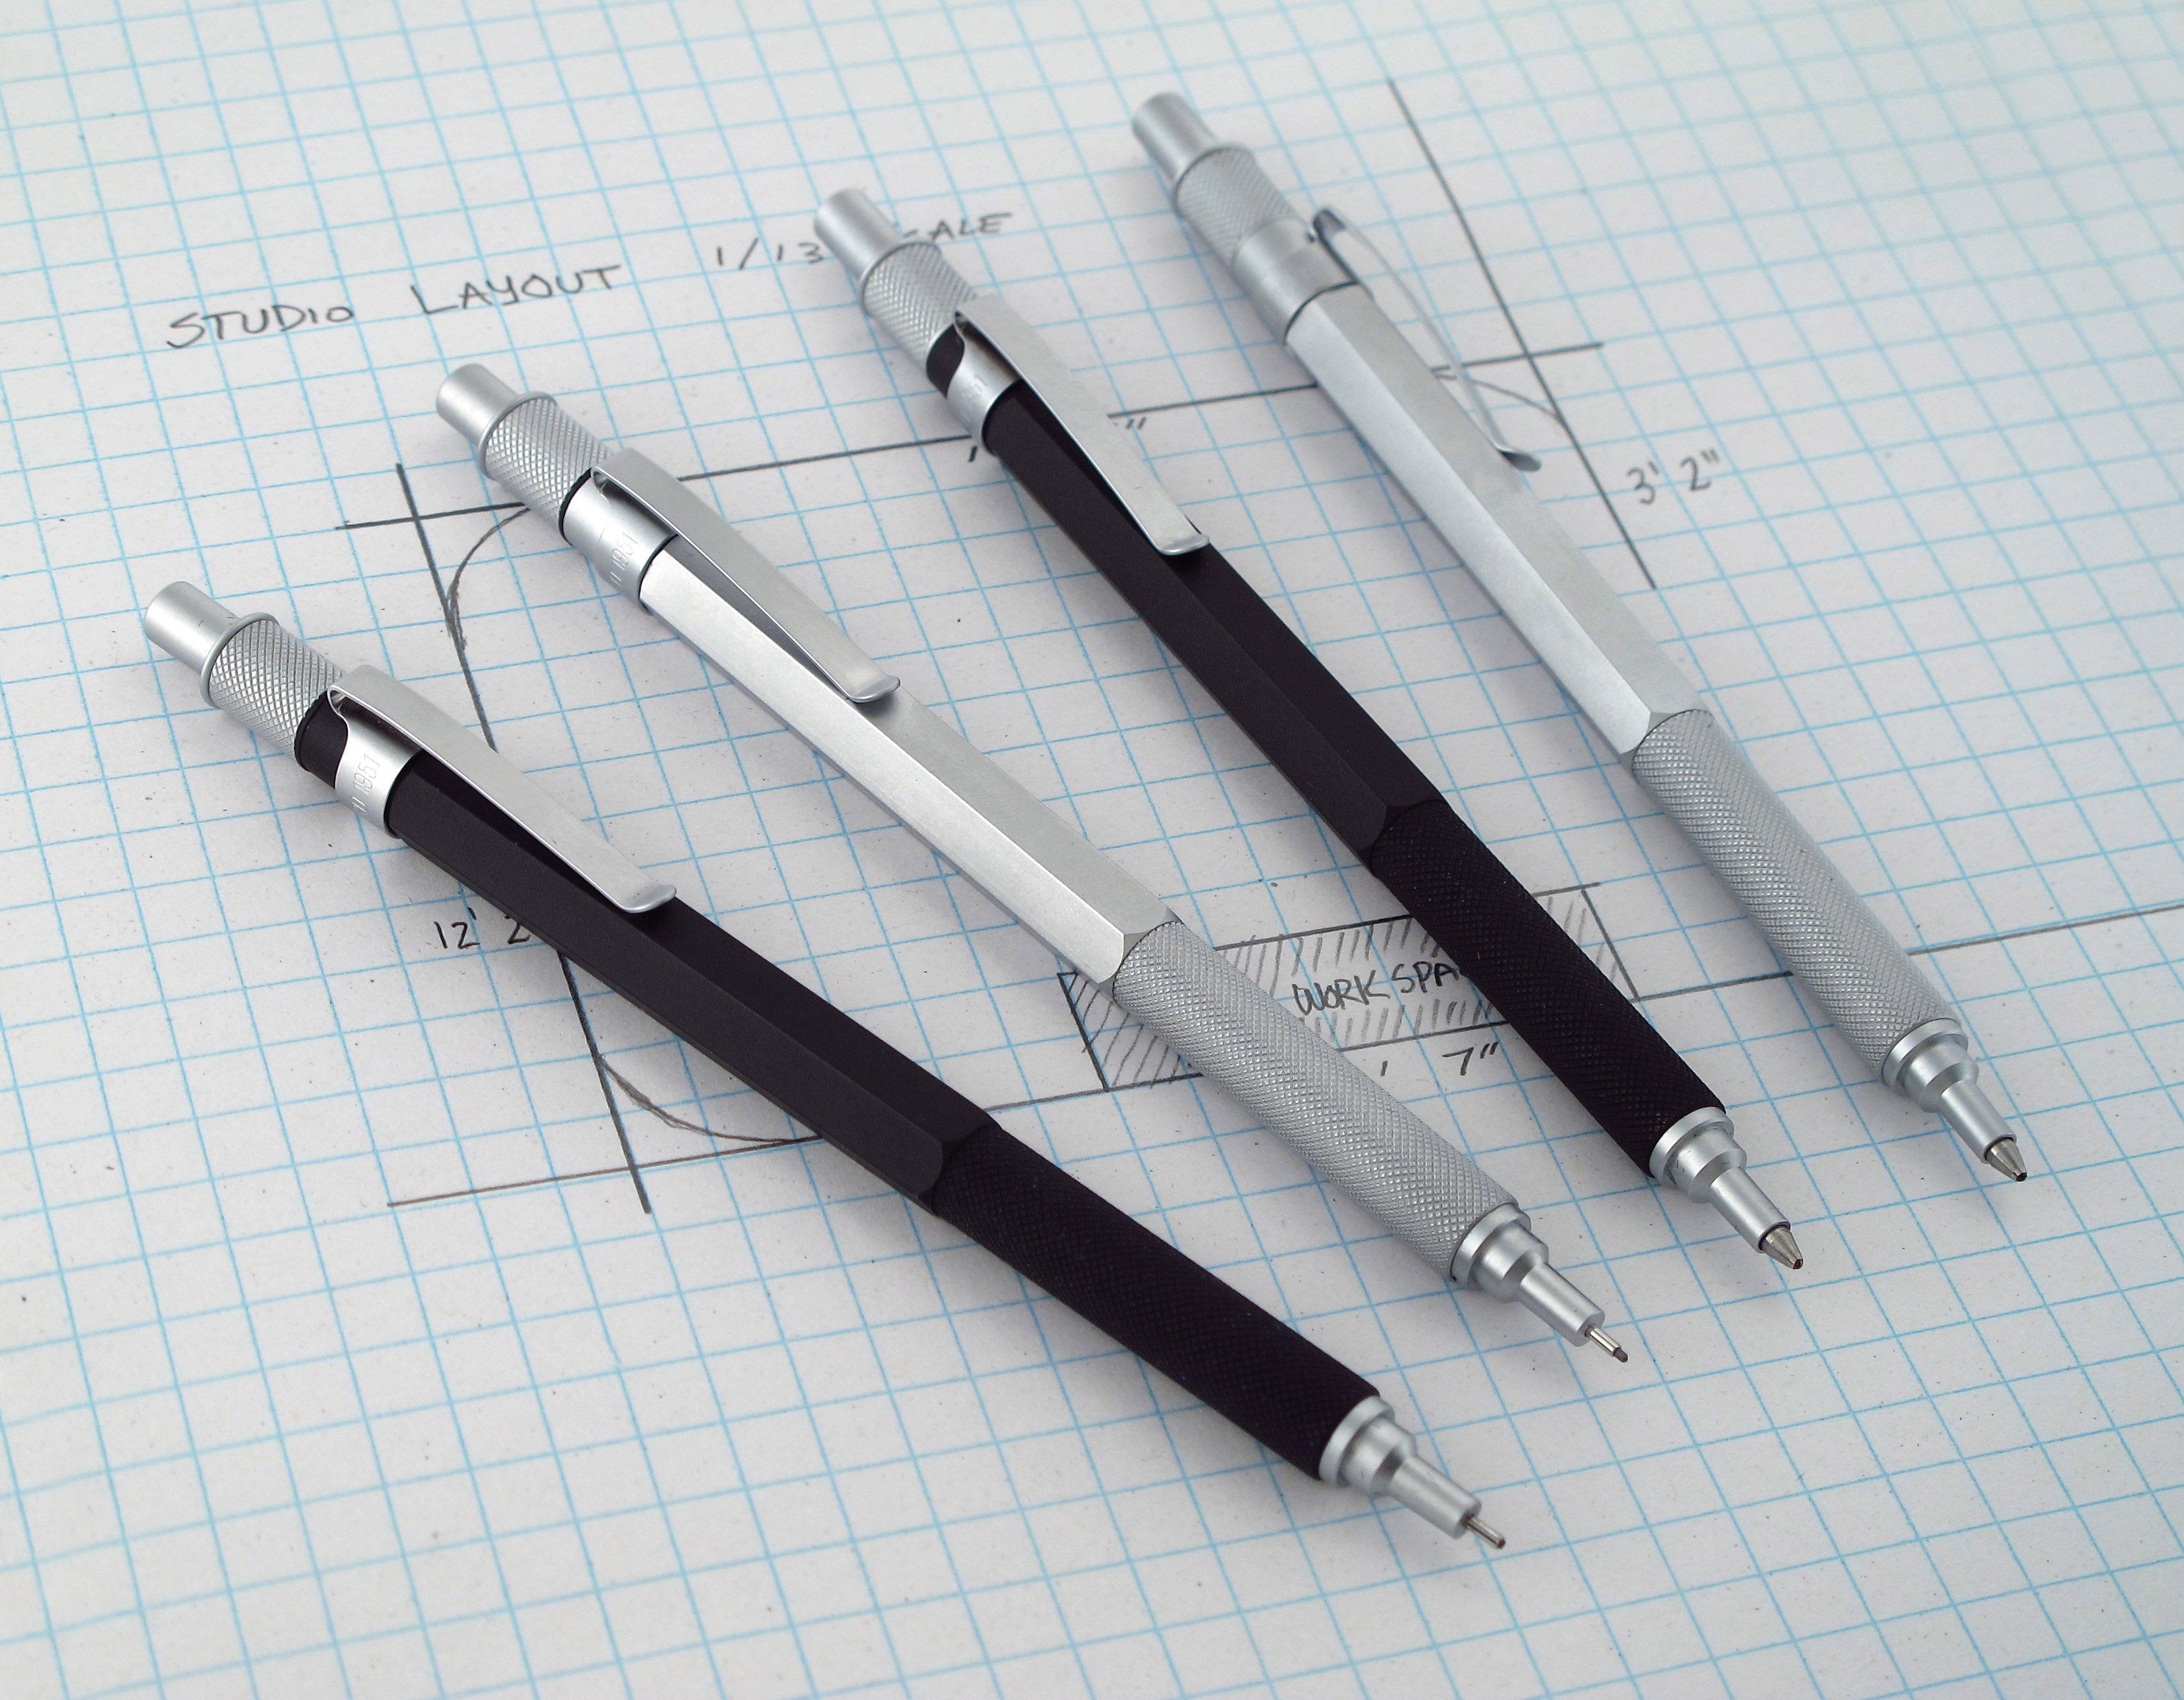 Retro 1951 Hex-o-matic- available in silver or black, as a ballpoint pen or .7 mm pencil.